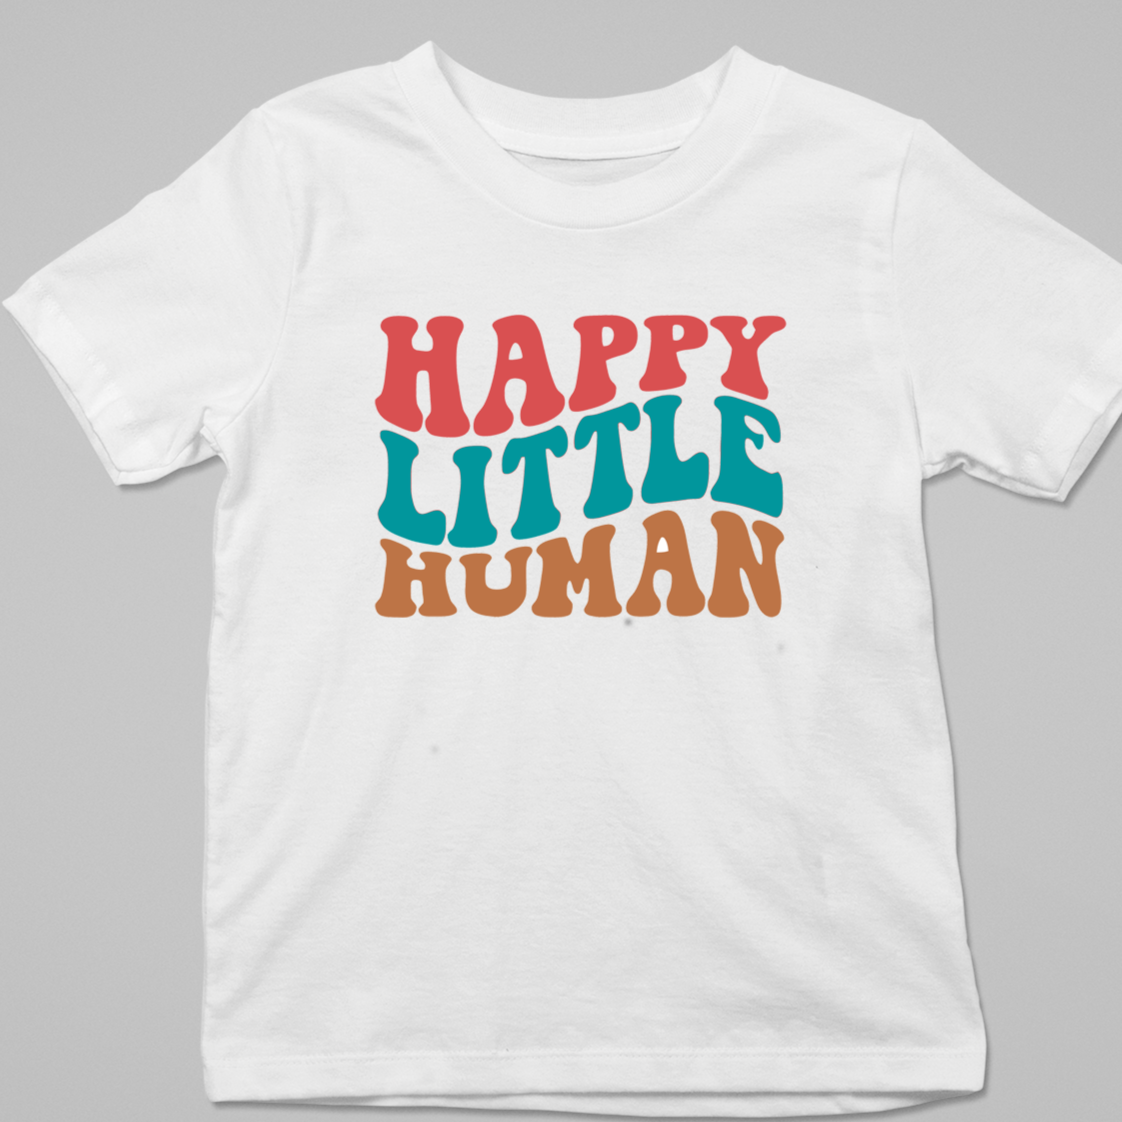 Happy Little Human -  Youth Full Color Heat Transfer